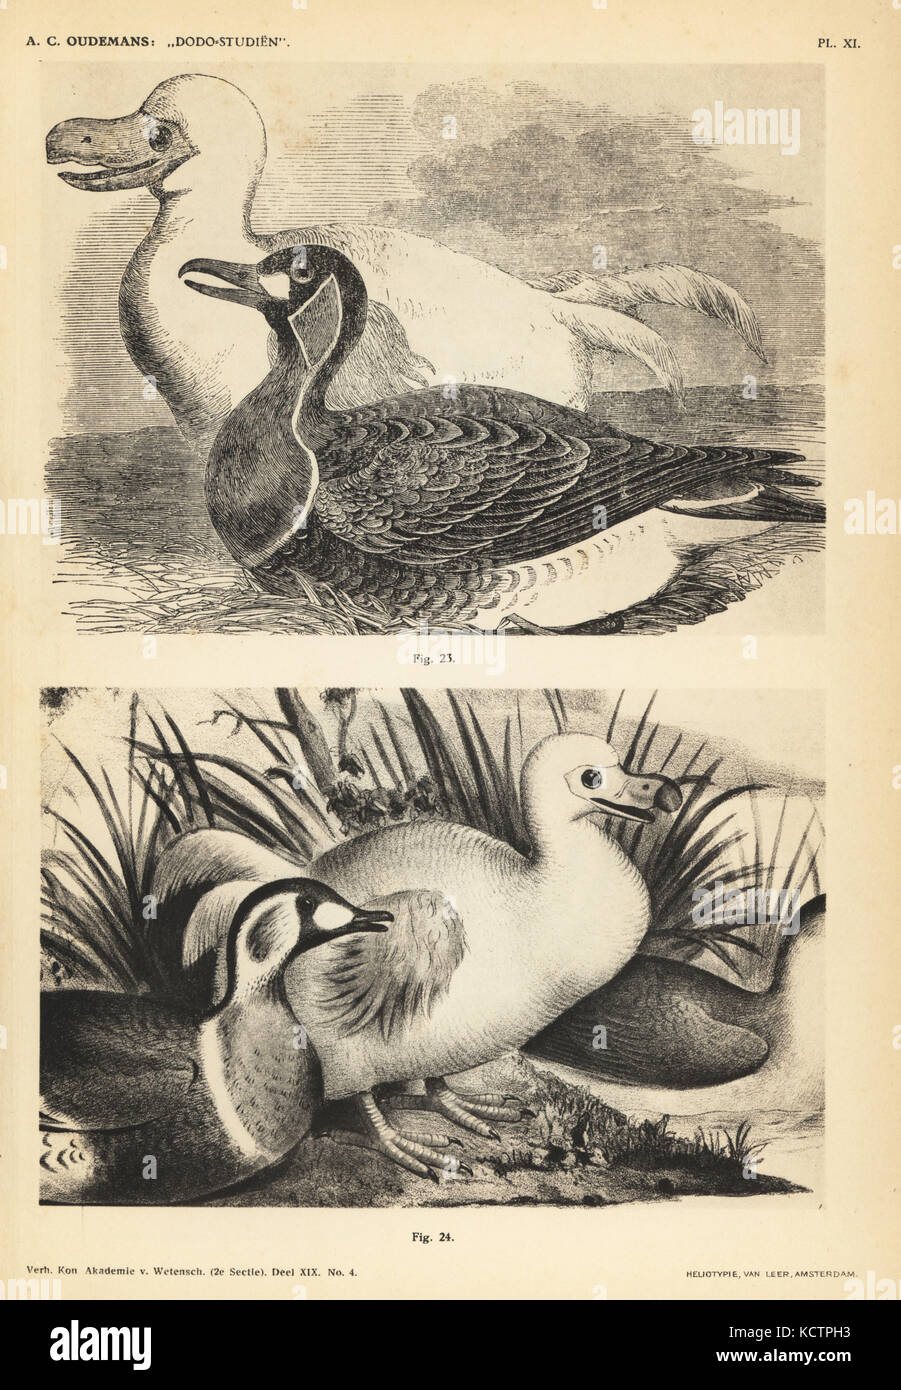 White dodo I by Pieter Withoos, female, Illustrated London News, 1856 (23) and white dodo II by Pieter Withoos, female, Transactions of the Zoological Society of London, 1863 (24). Heliotype by Van Leer from Dr. Anthonie Cornelis Oudemans' Dodo Studies, Amsterdam, Johannes Muller, 1917. Stock Photo